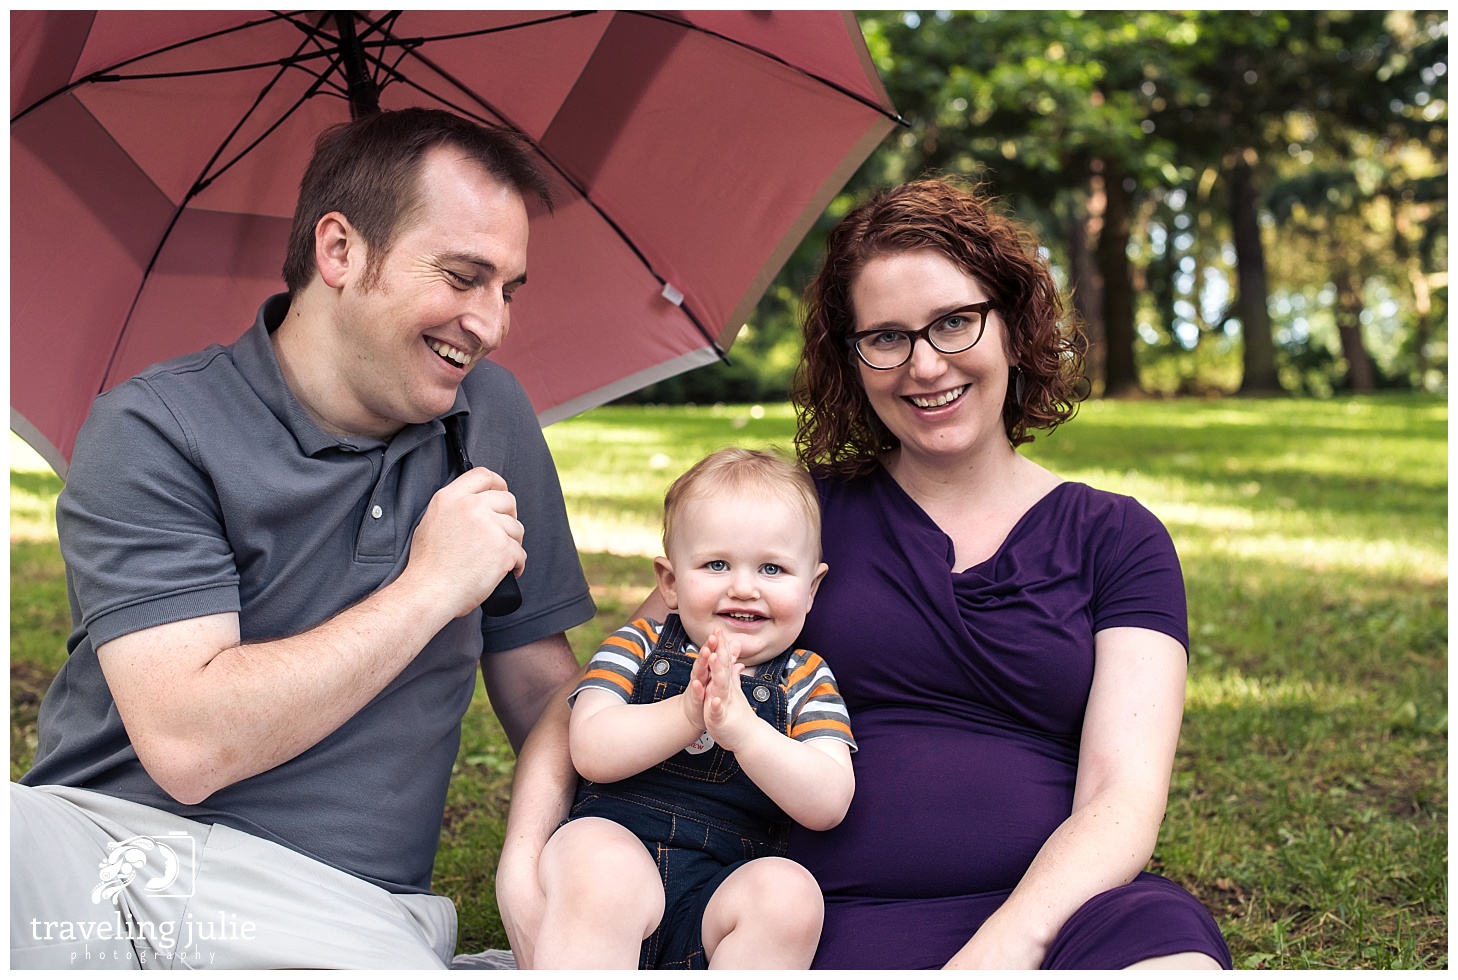 Gender reveal family photography pink umbrella